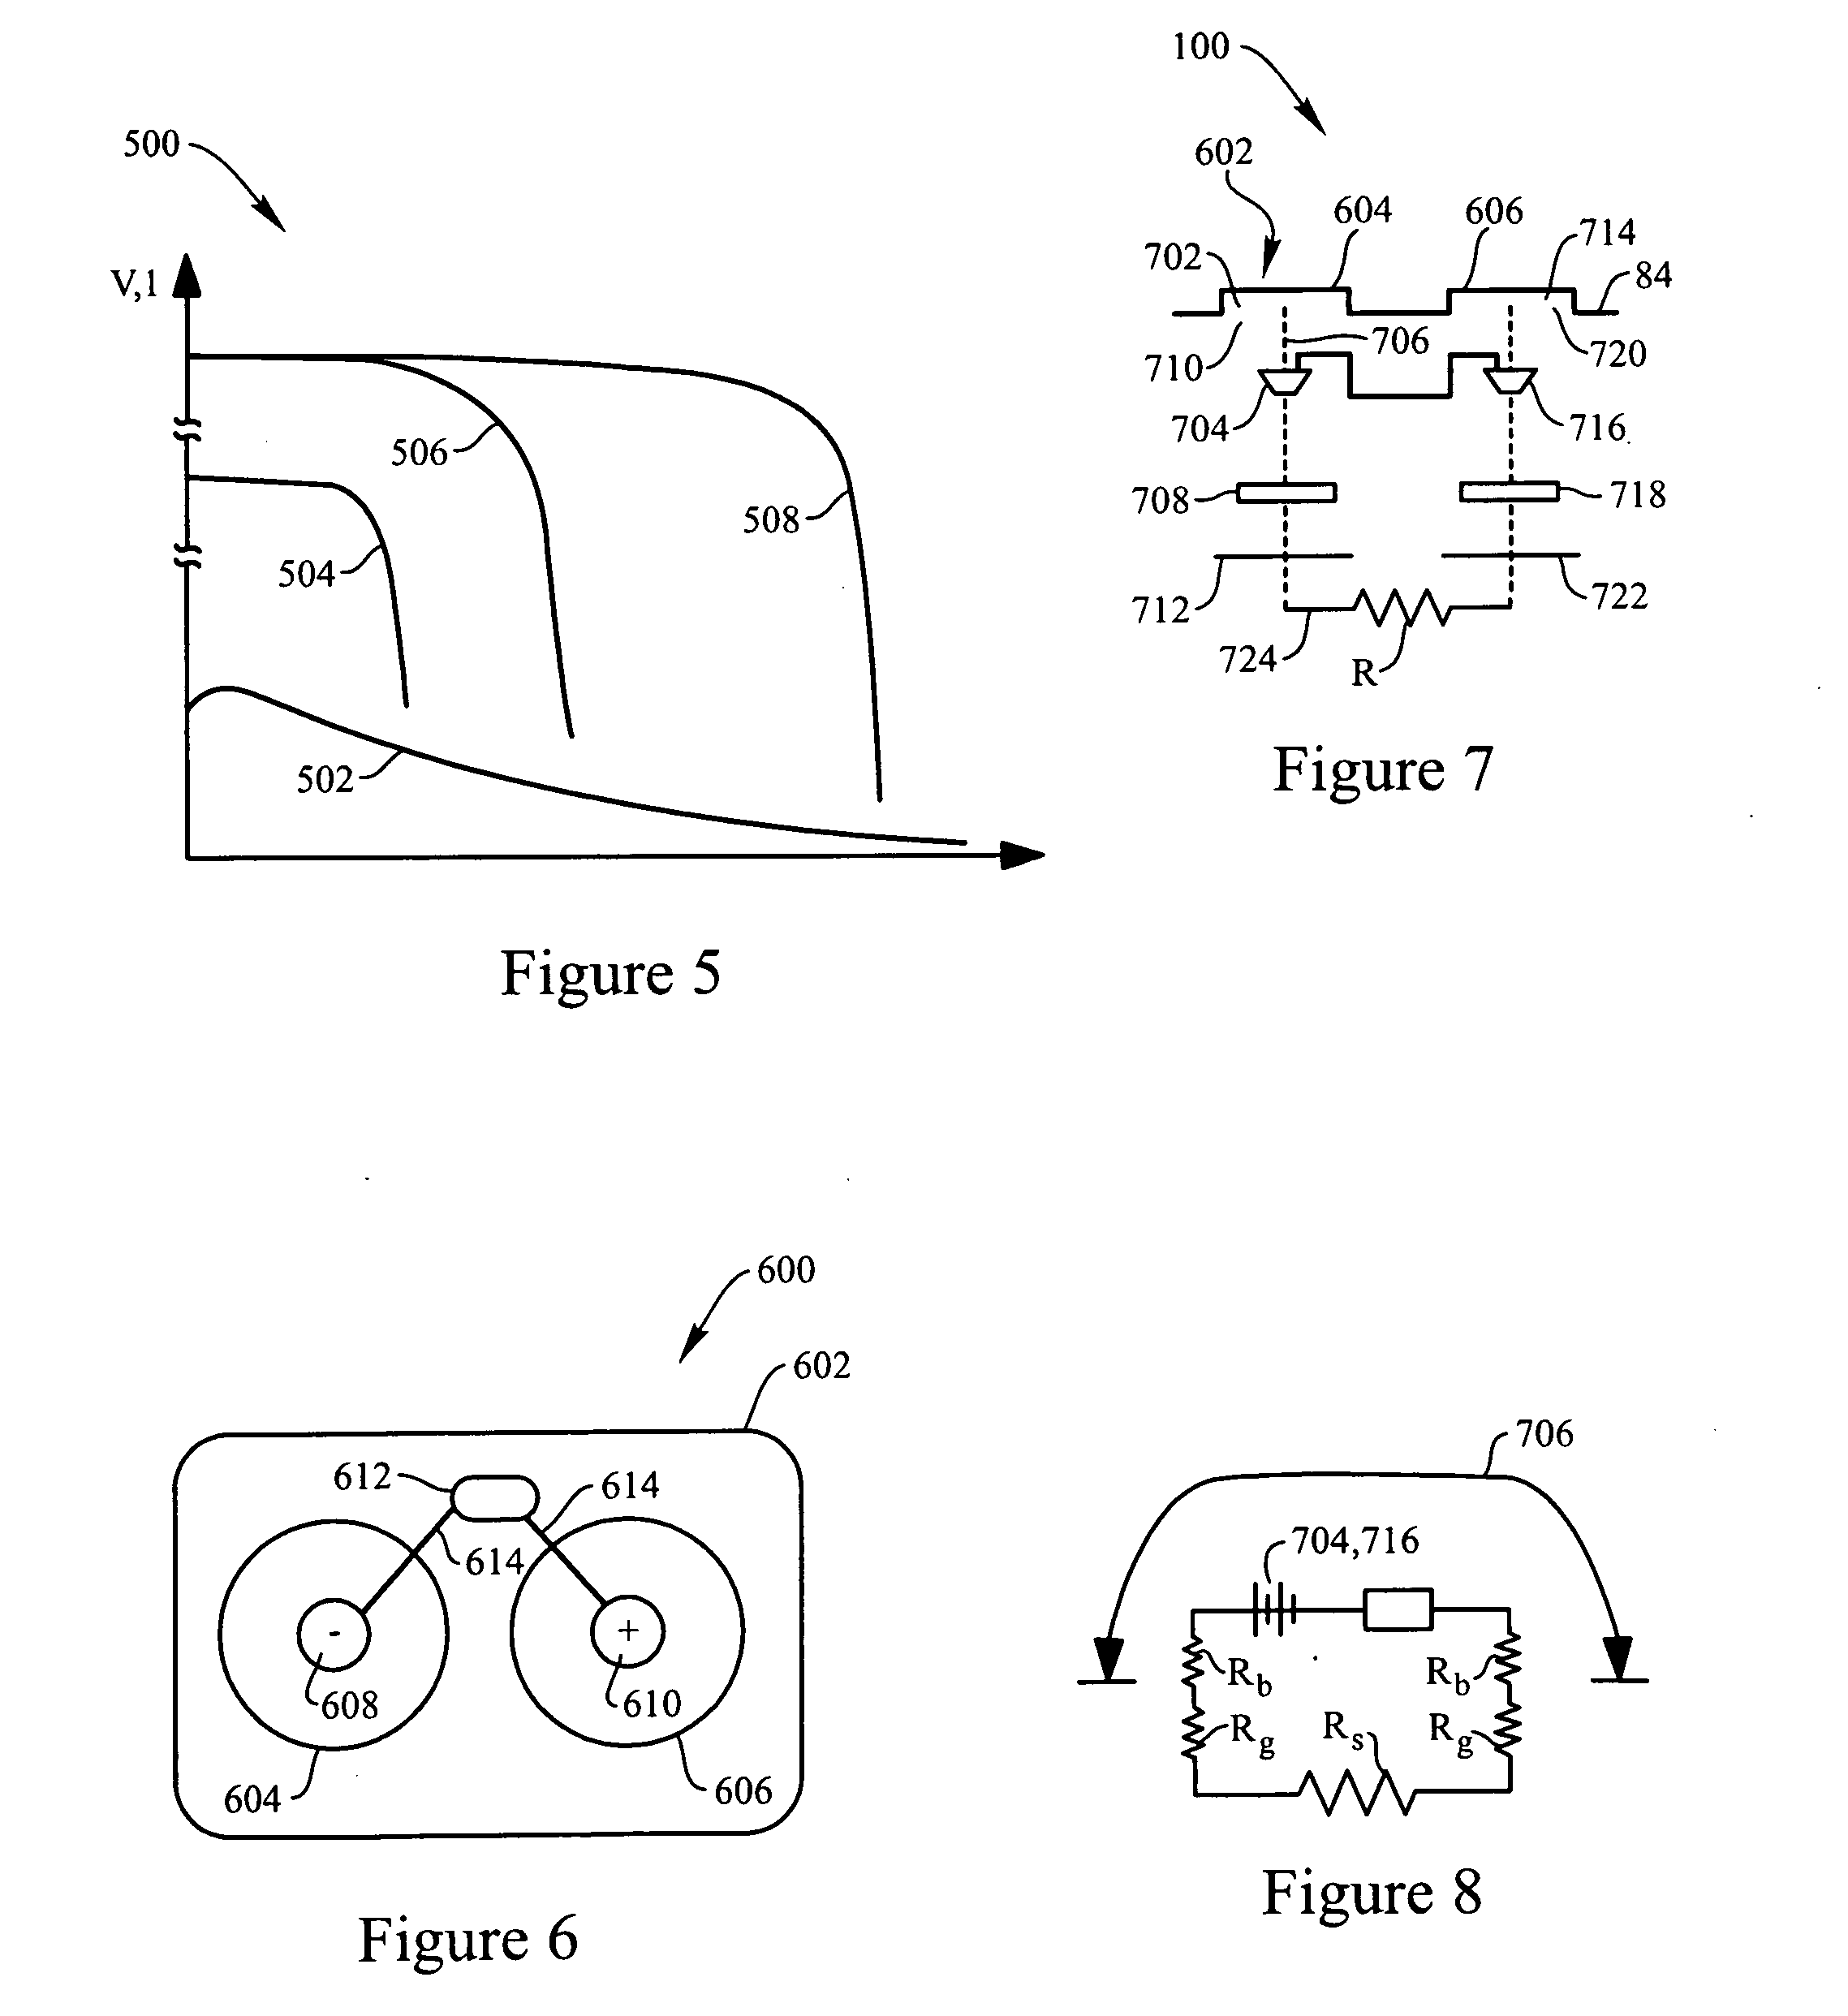 Method for iontophoretic fluid delivery